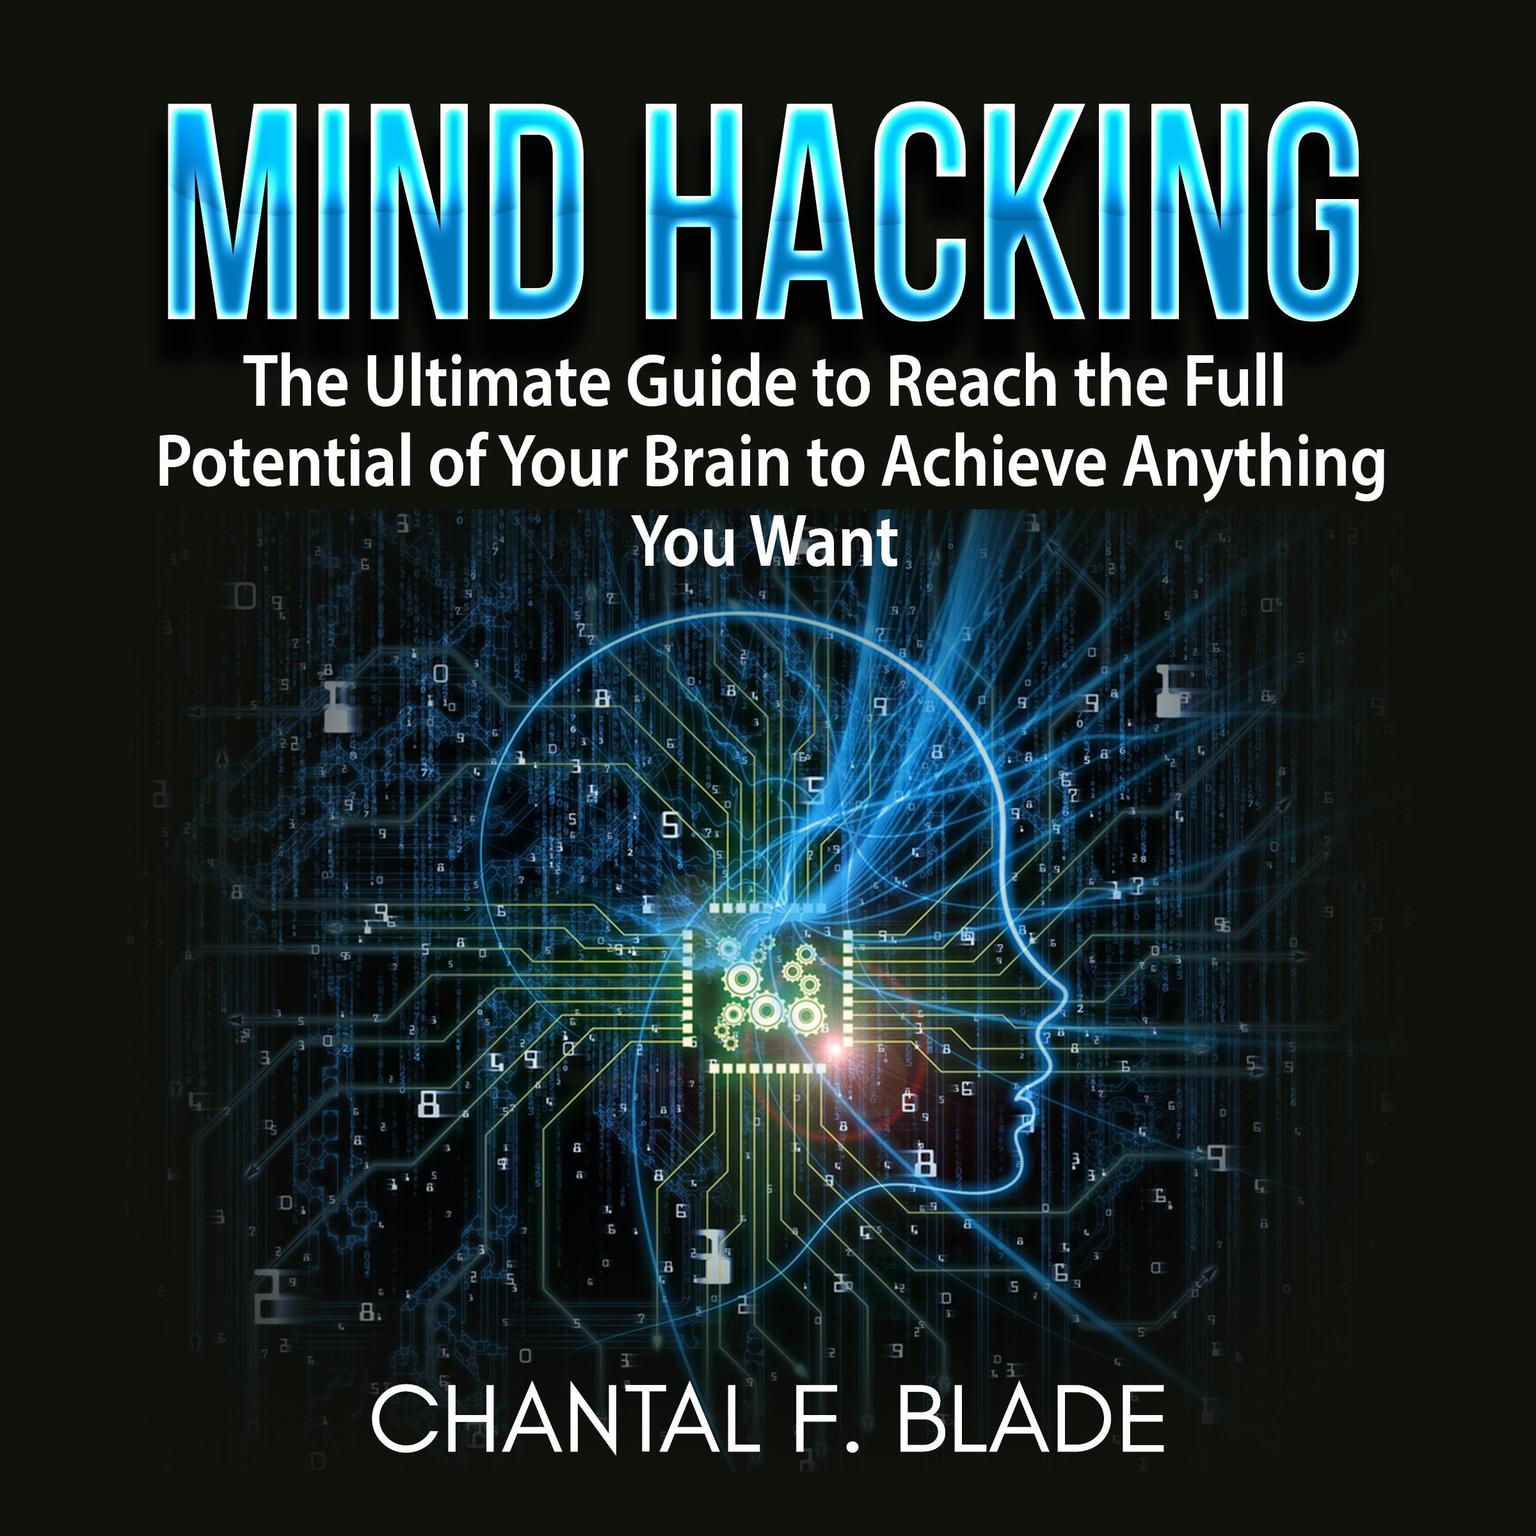 Mind Hacking: The Ultimate Guide to Reach the Full Potential of Your Brain to Achieve Anything You Want Audiobook, by Chantal F. Blade